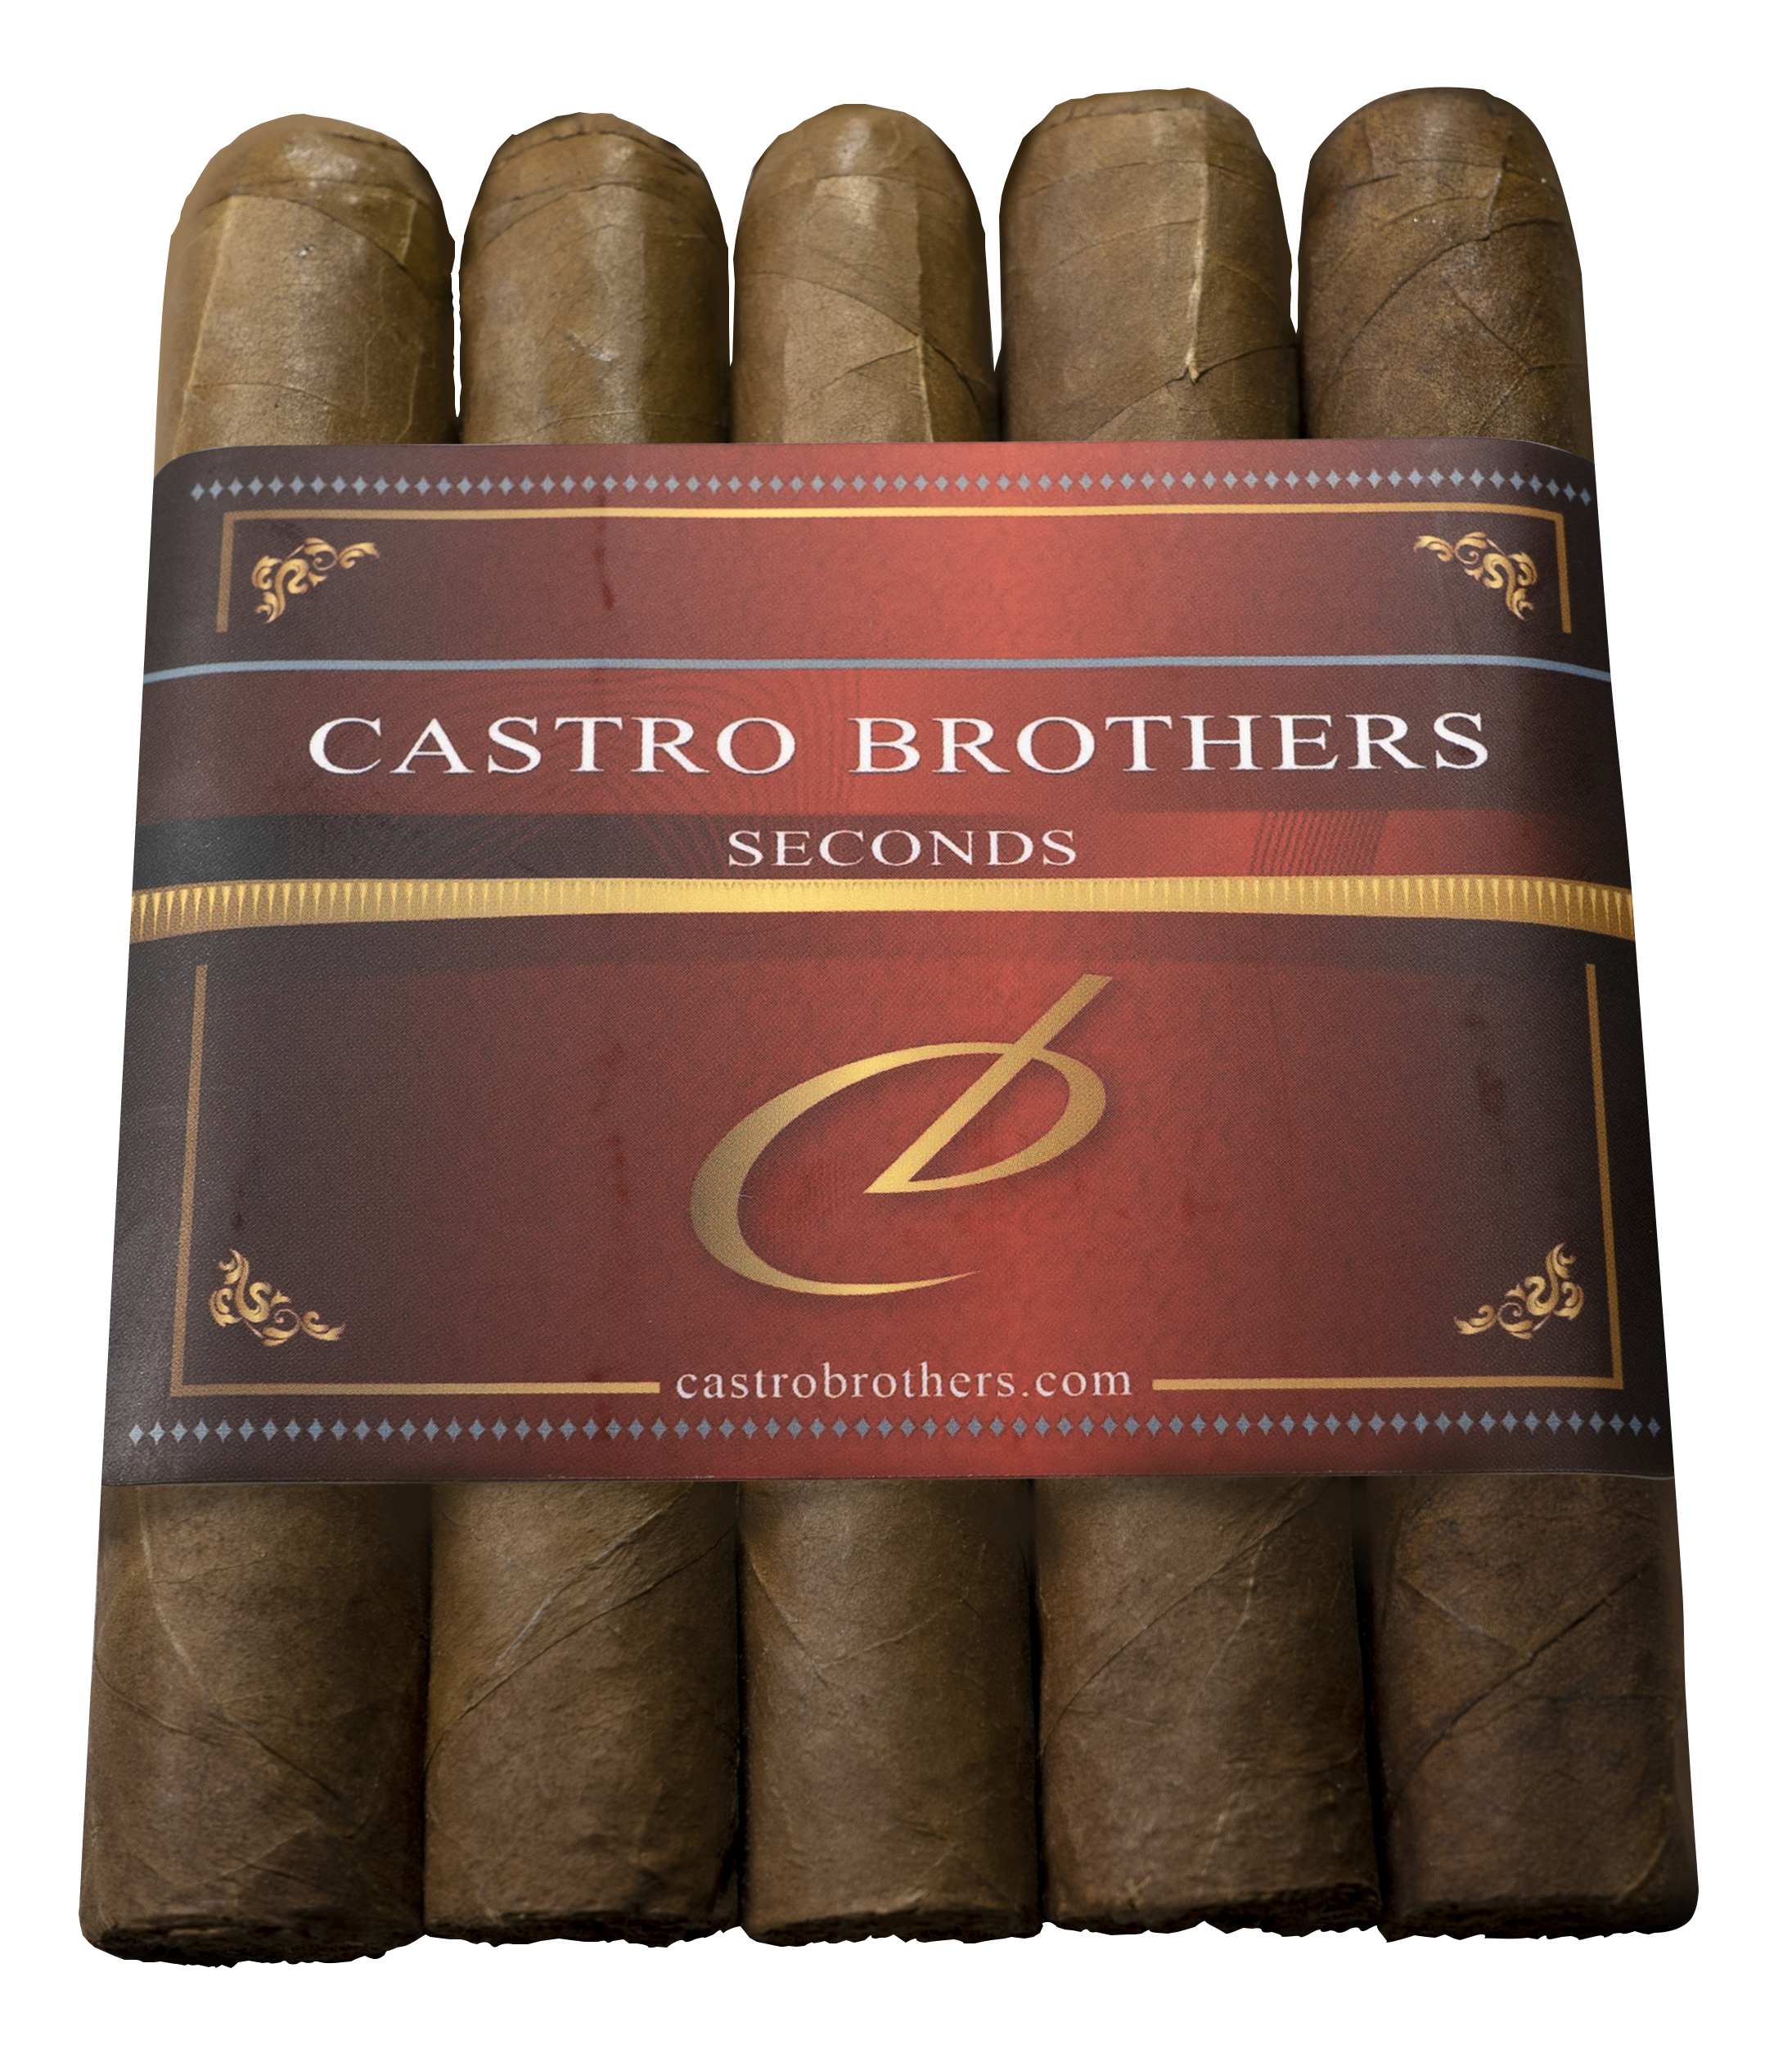 Castro Brothers Seconds